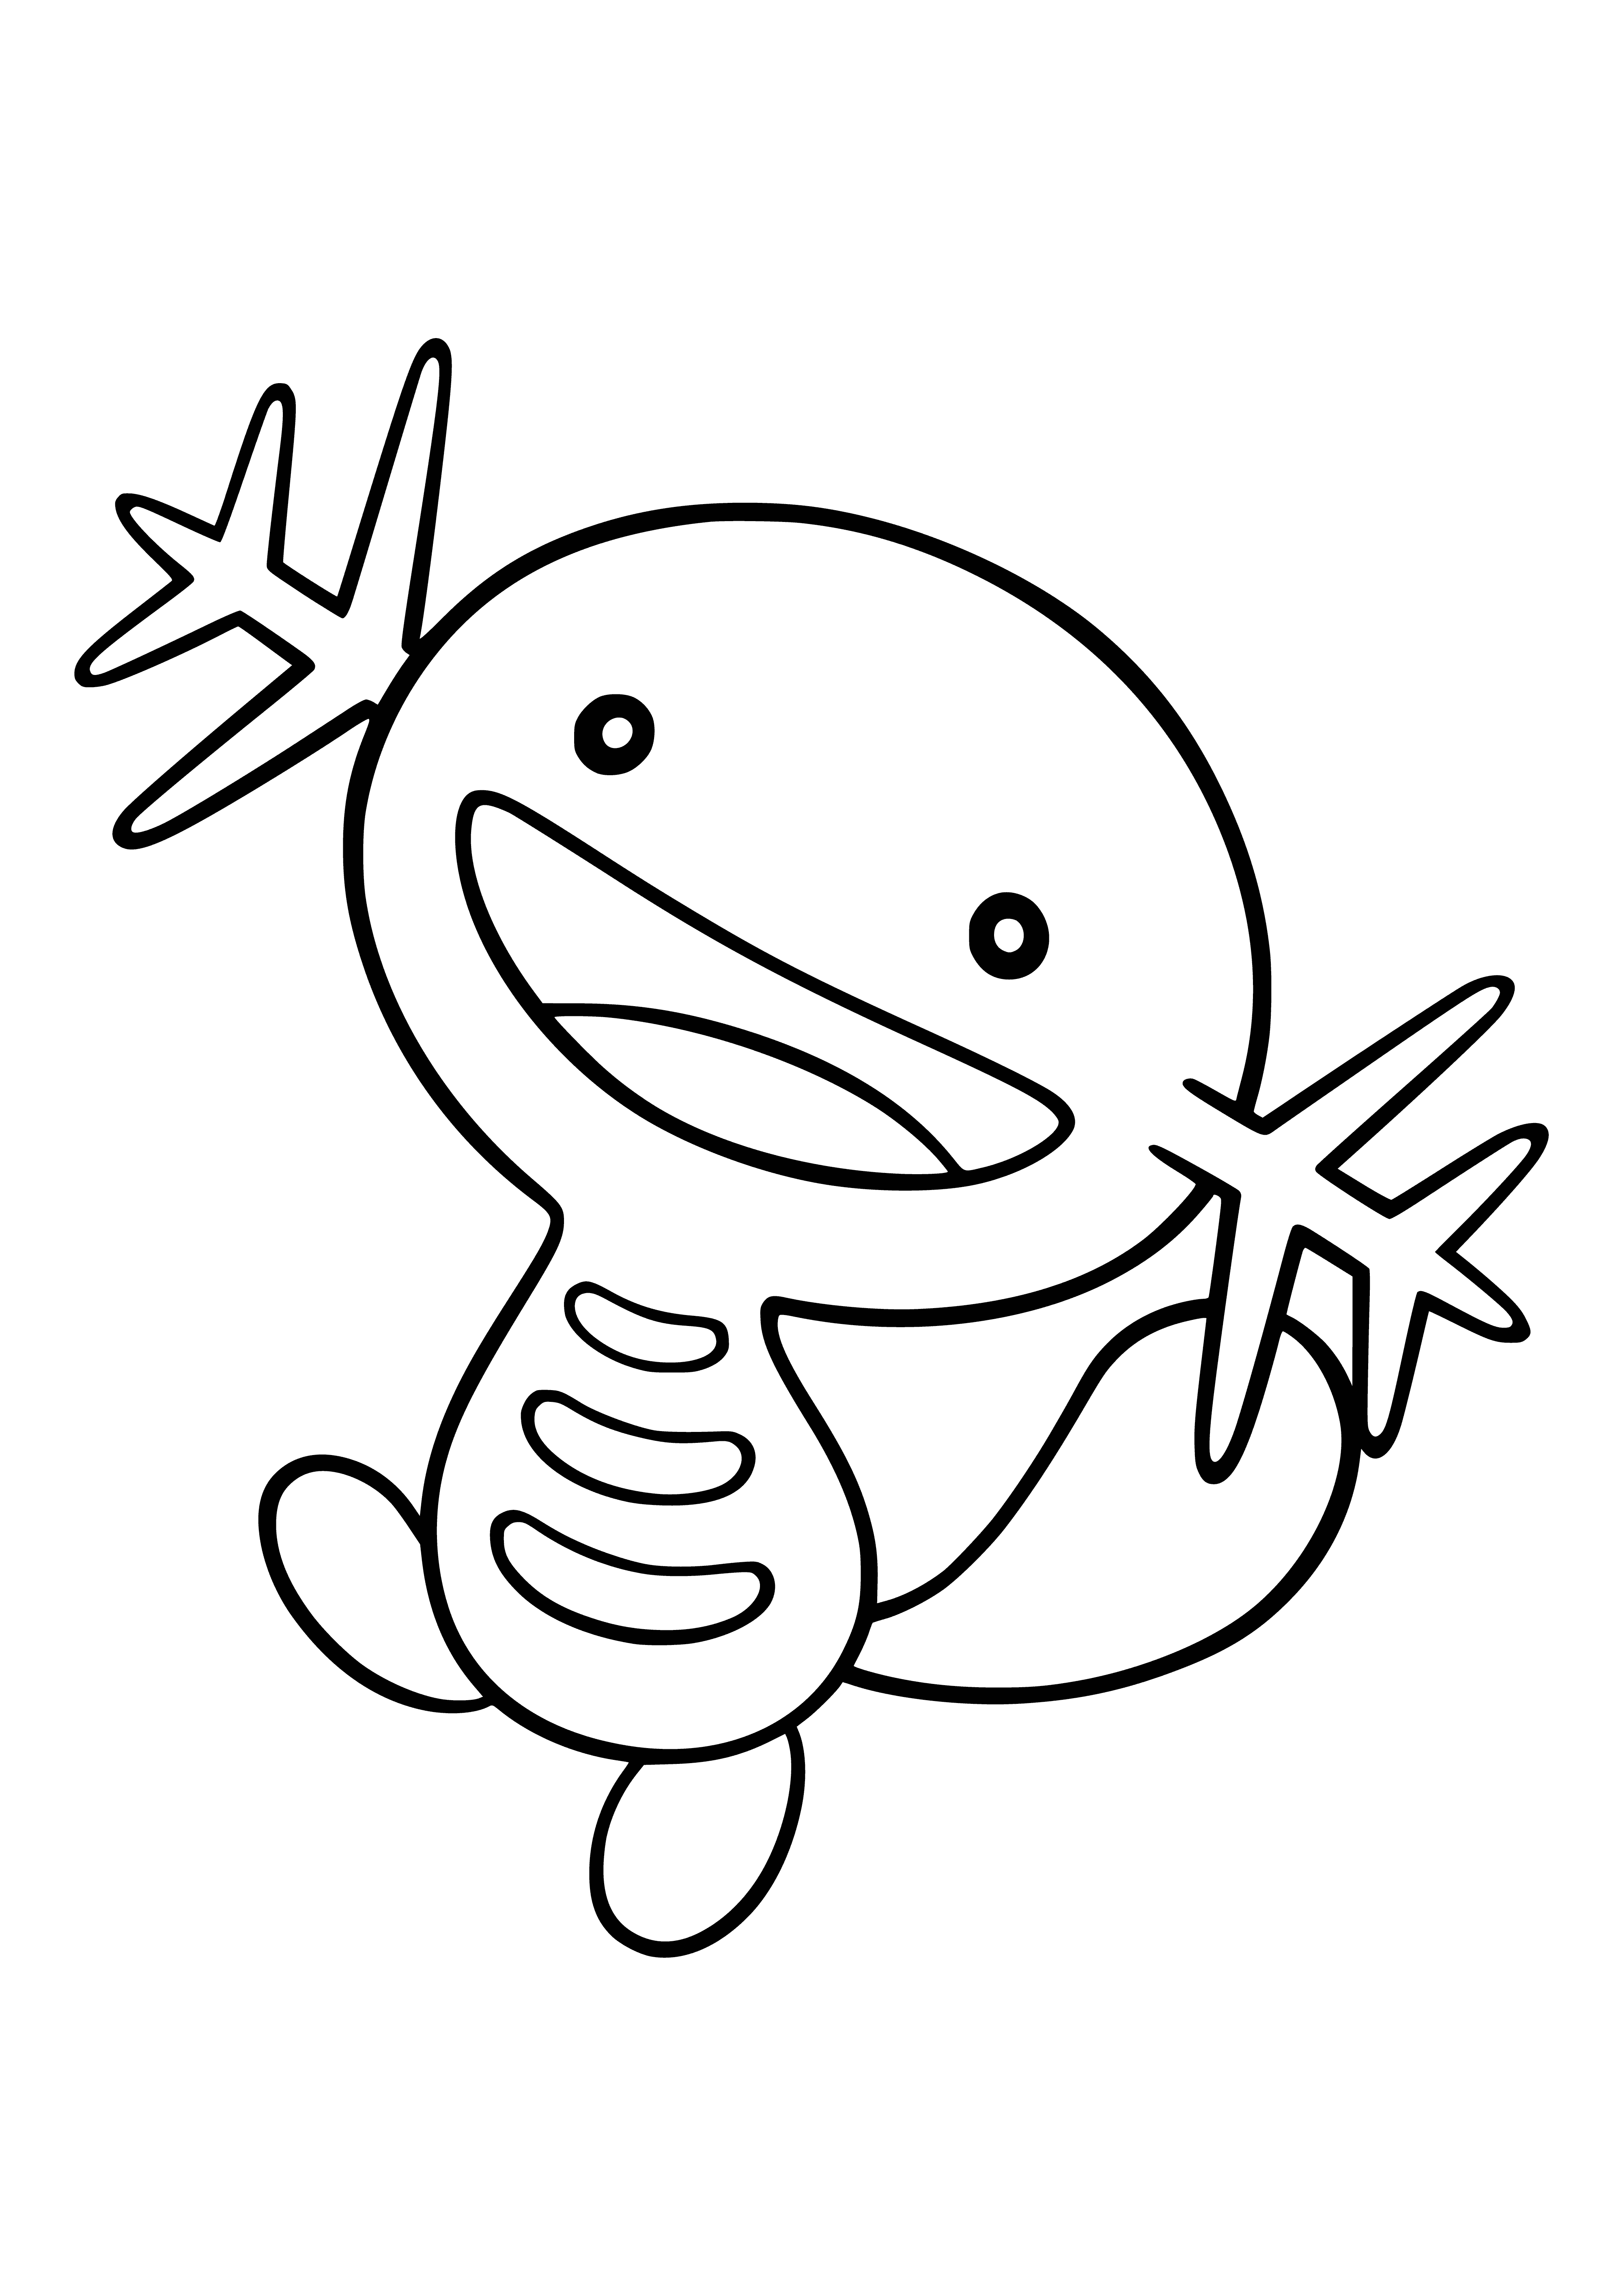 coloring page: Frog-like Pokémon w/white/black stripe, bulbous eyes, small front legs, webbed hind legs, long tail.